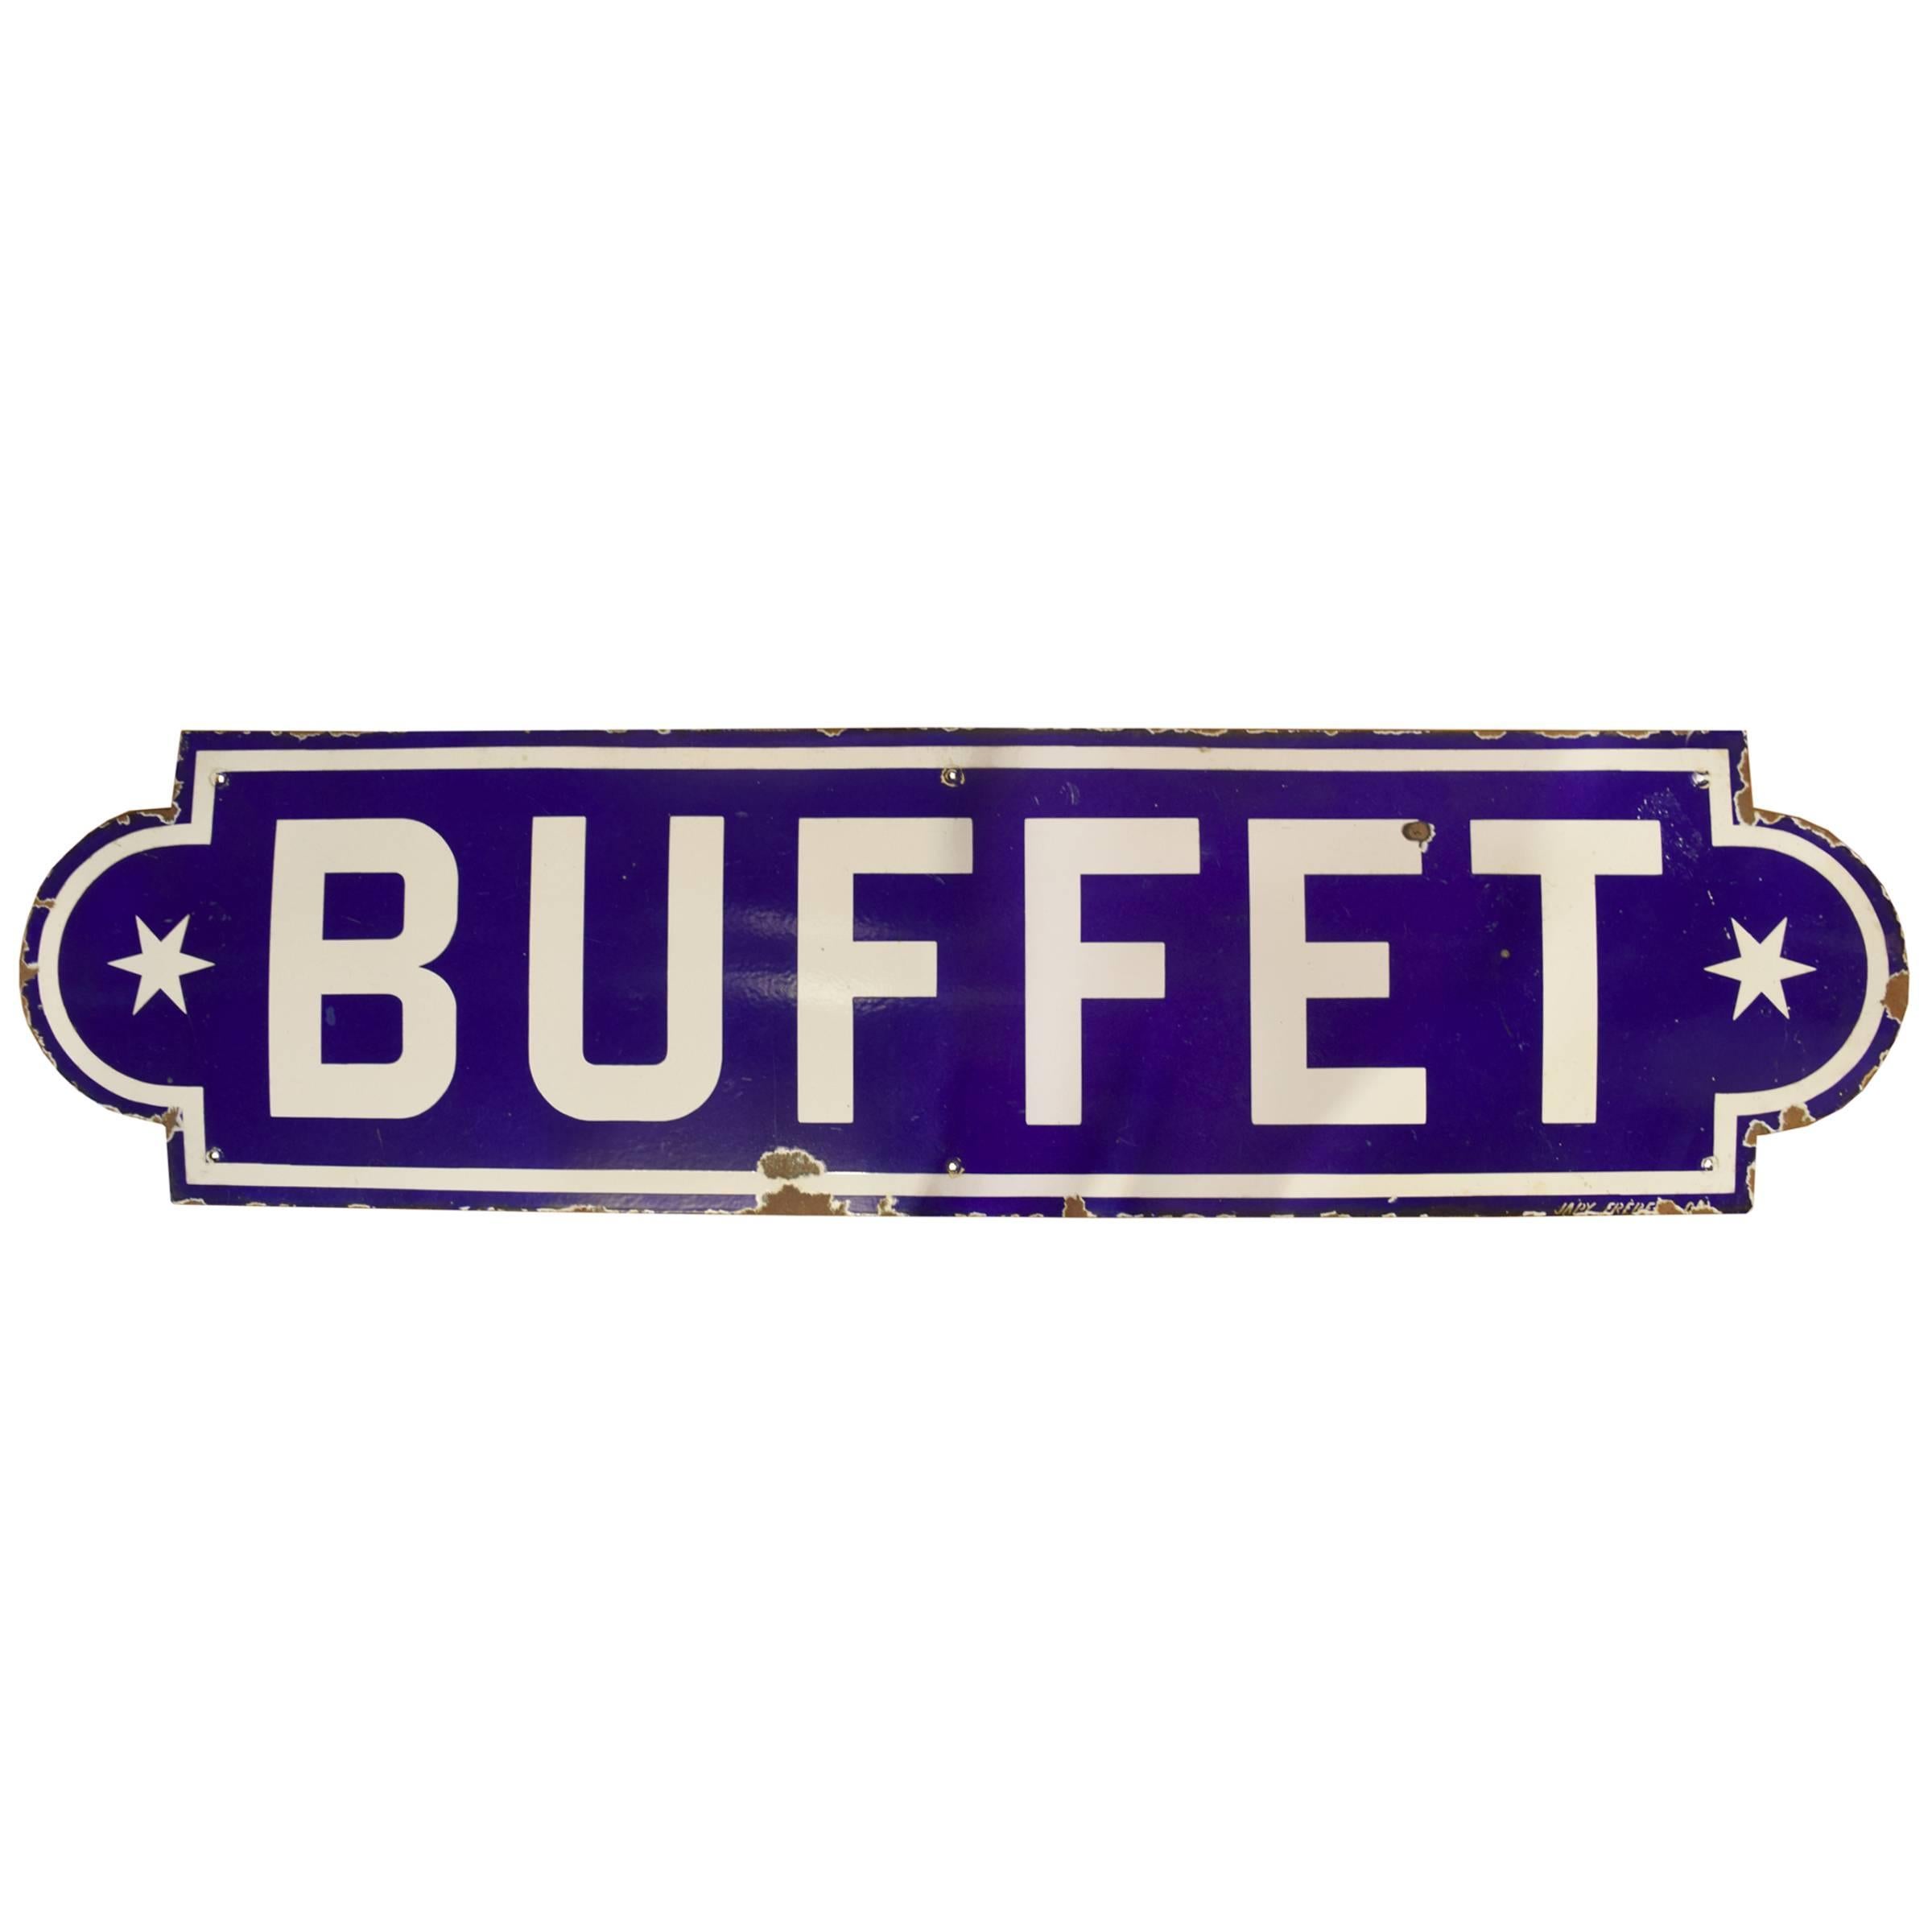 French Porcelain 'Buffet' Sign